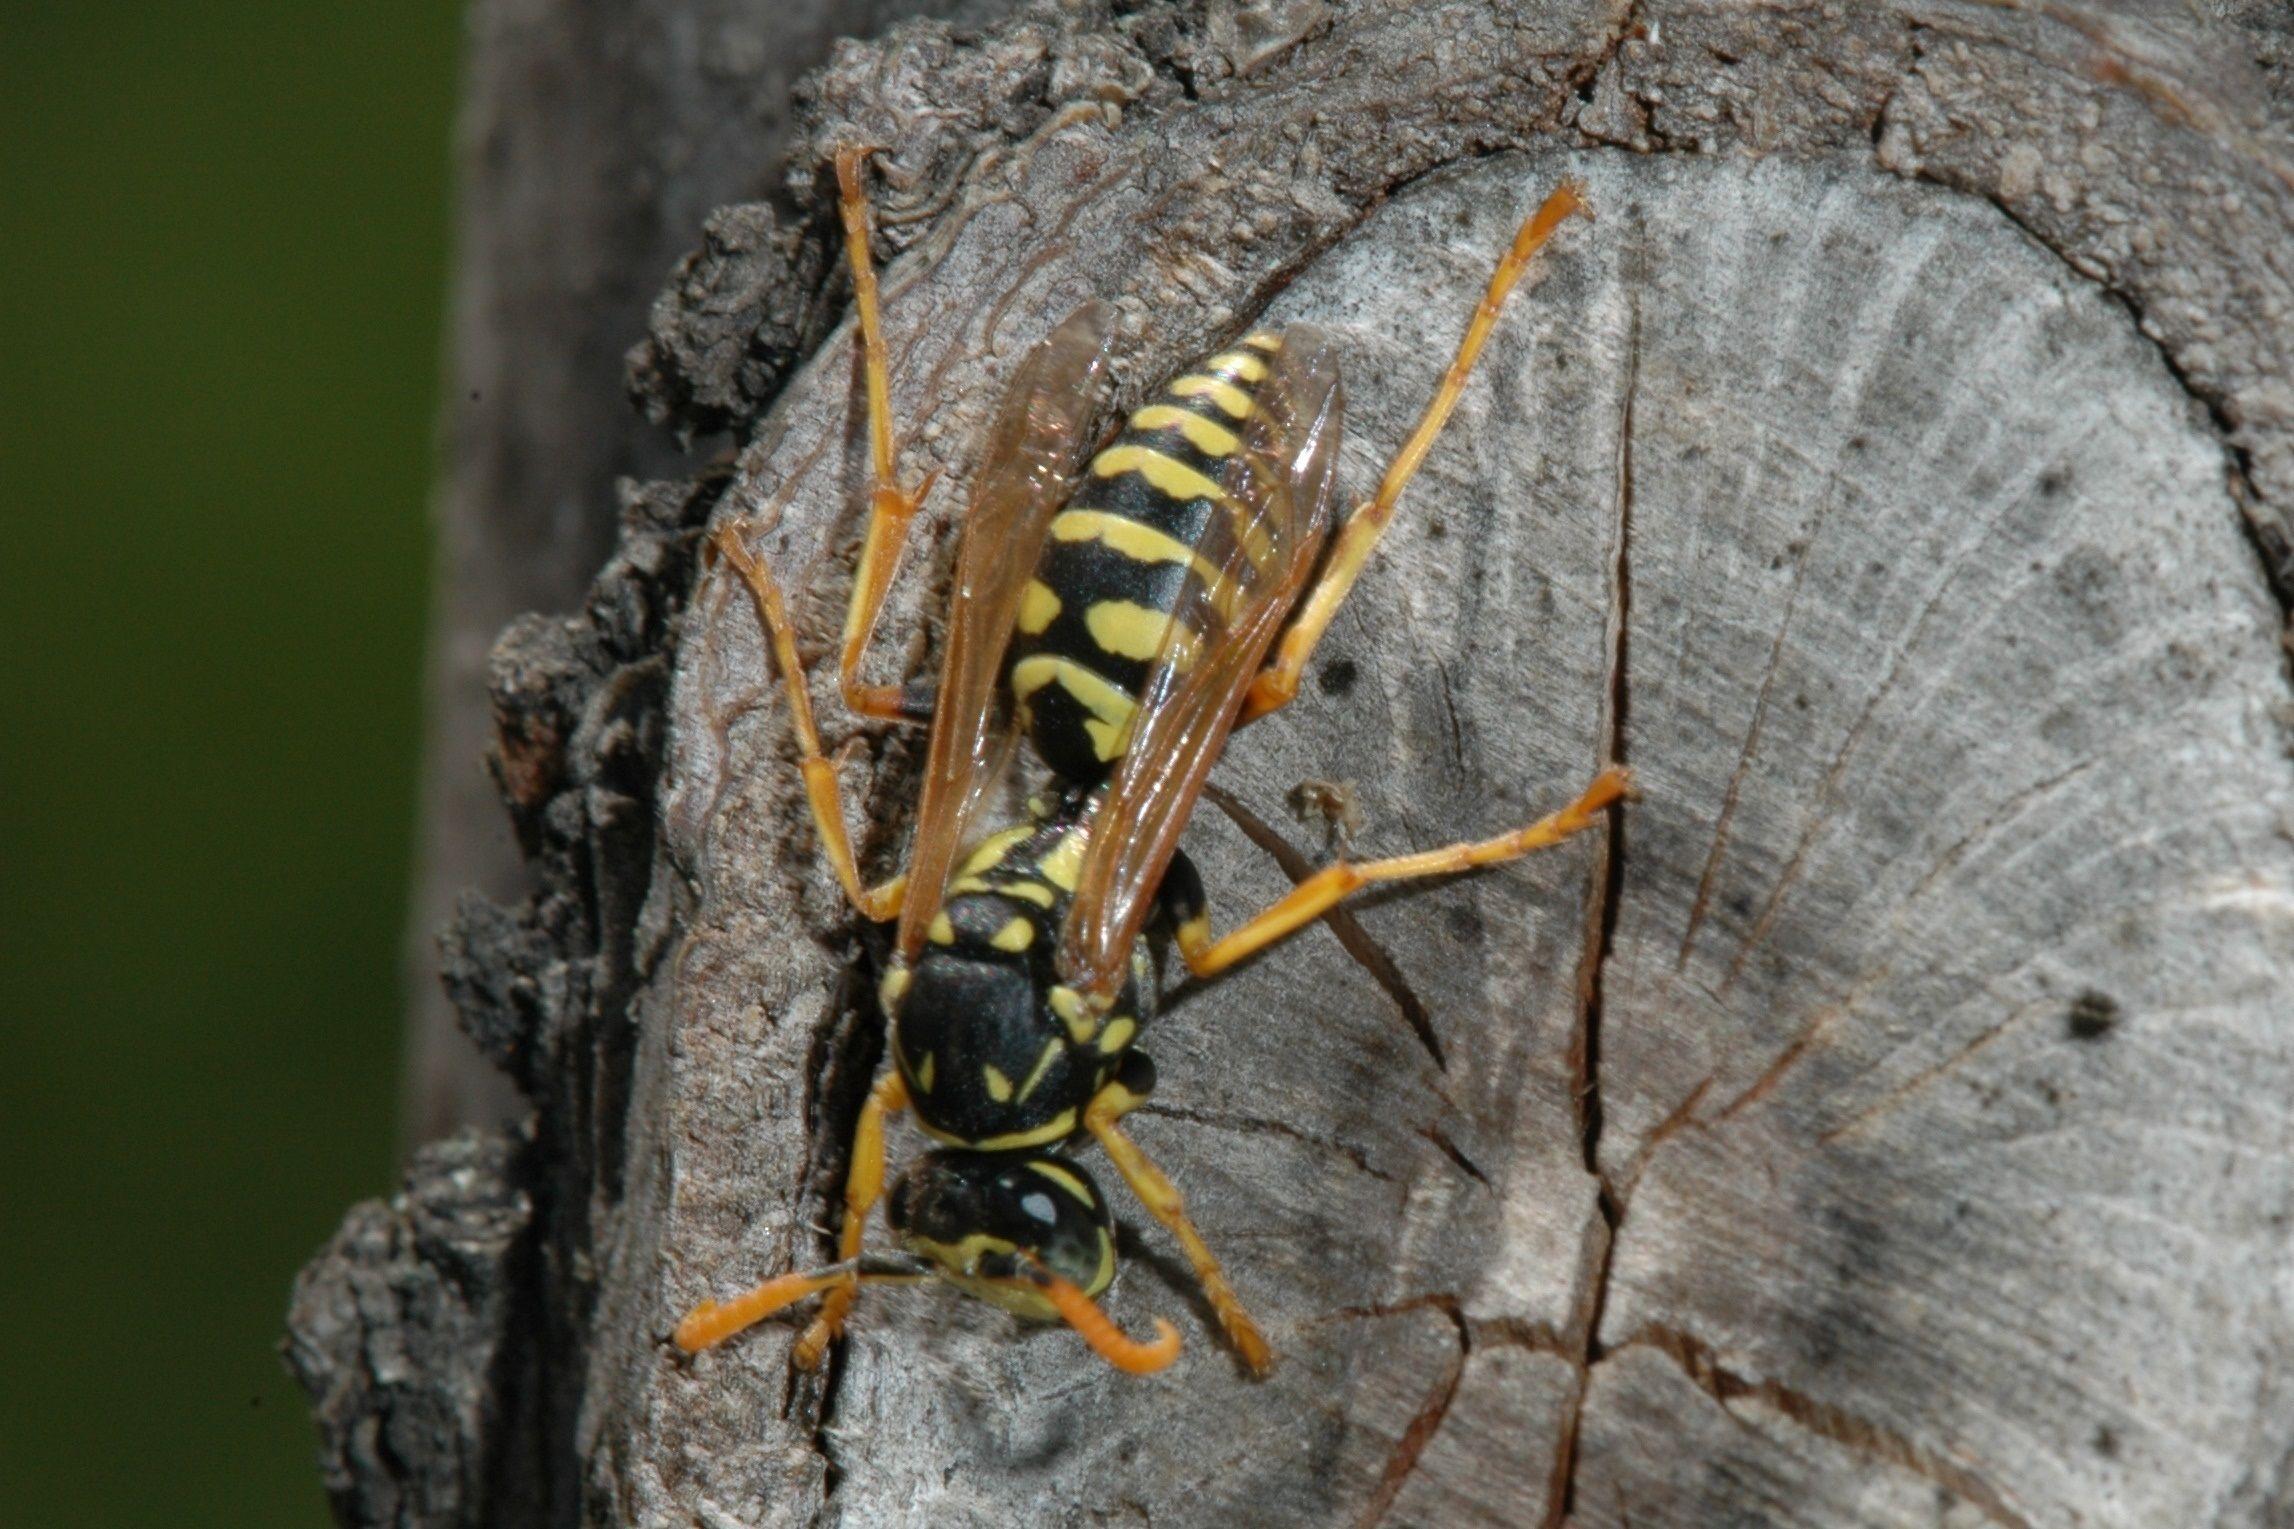 Wasp Control Melbourne Is Now Simple With These Tips